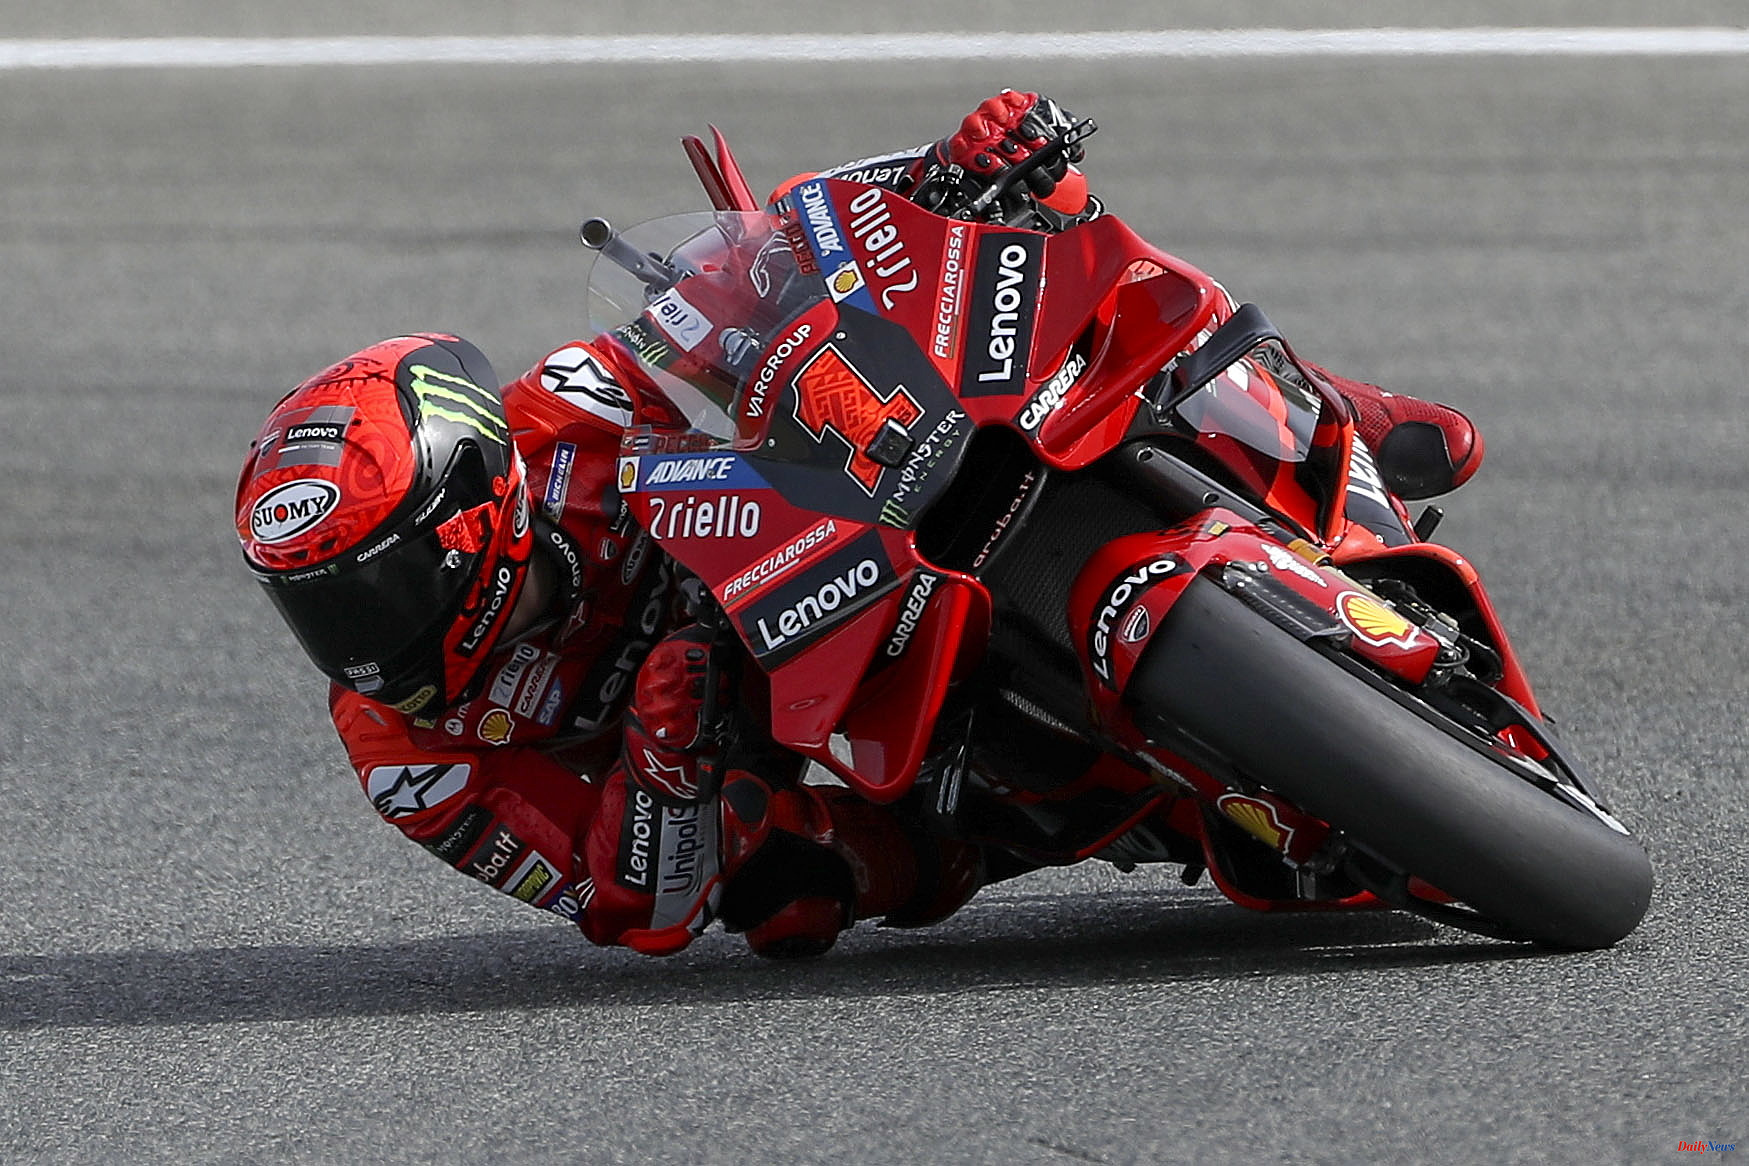 MotoGP motorcycles in Jerez: Schedules and where to watch the Spanish Grand Prix races on television and online